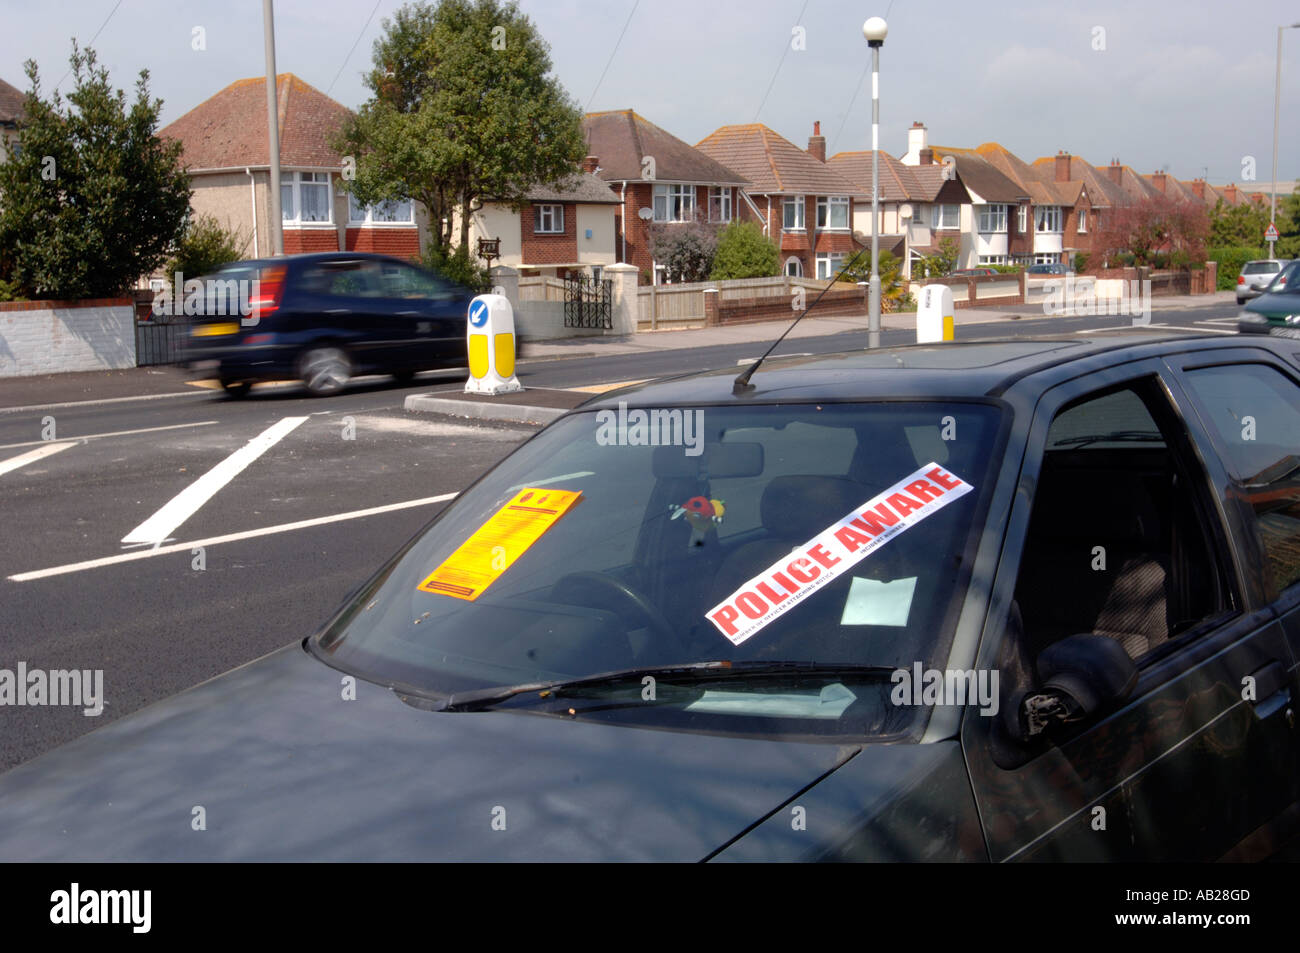 Abandoned car with a Police aware notice, Britain UK Stock Photo